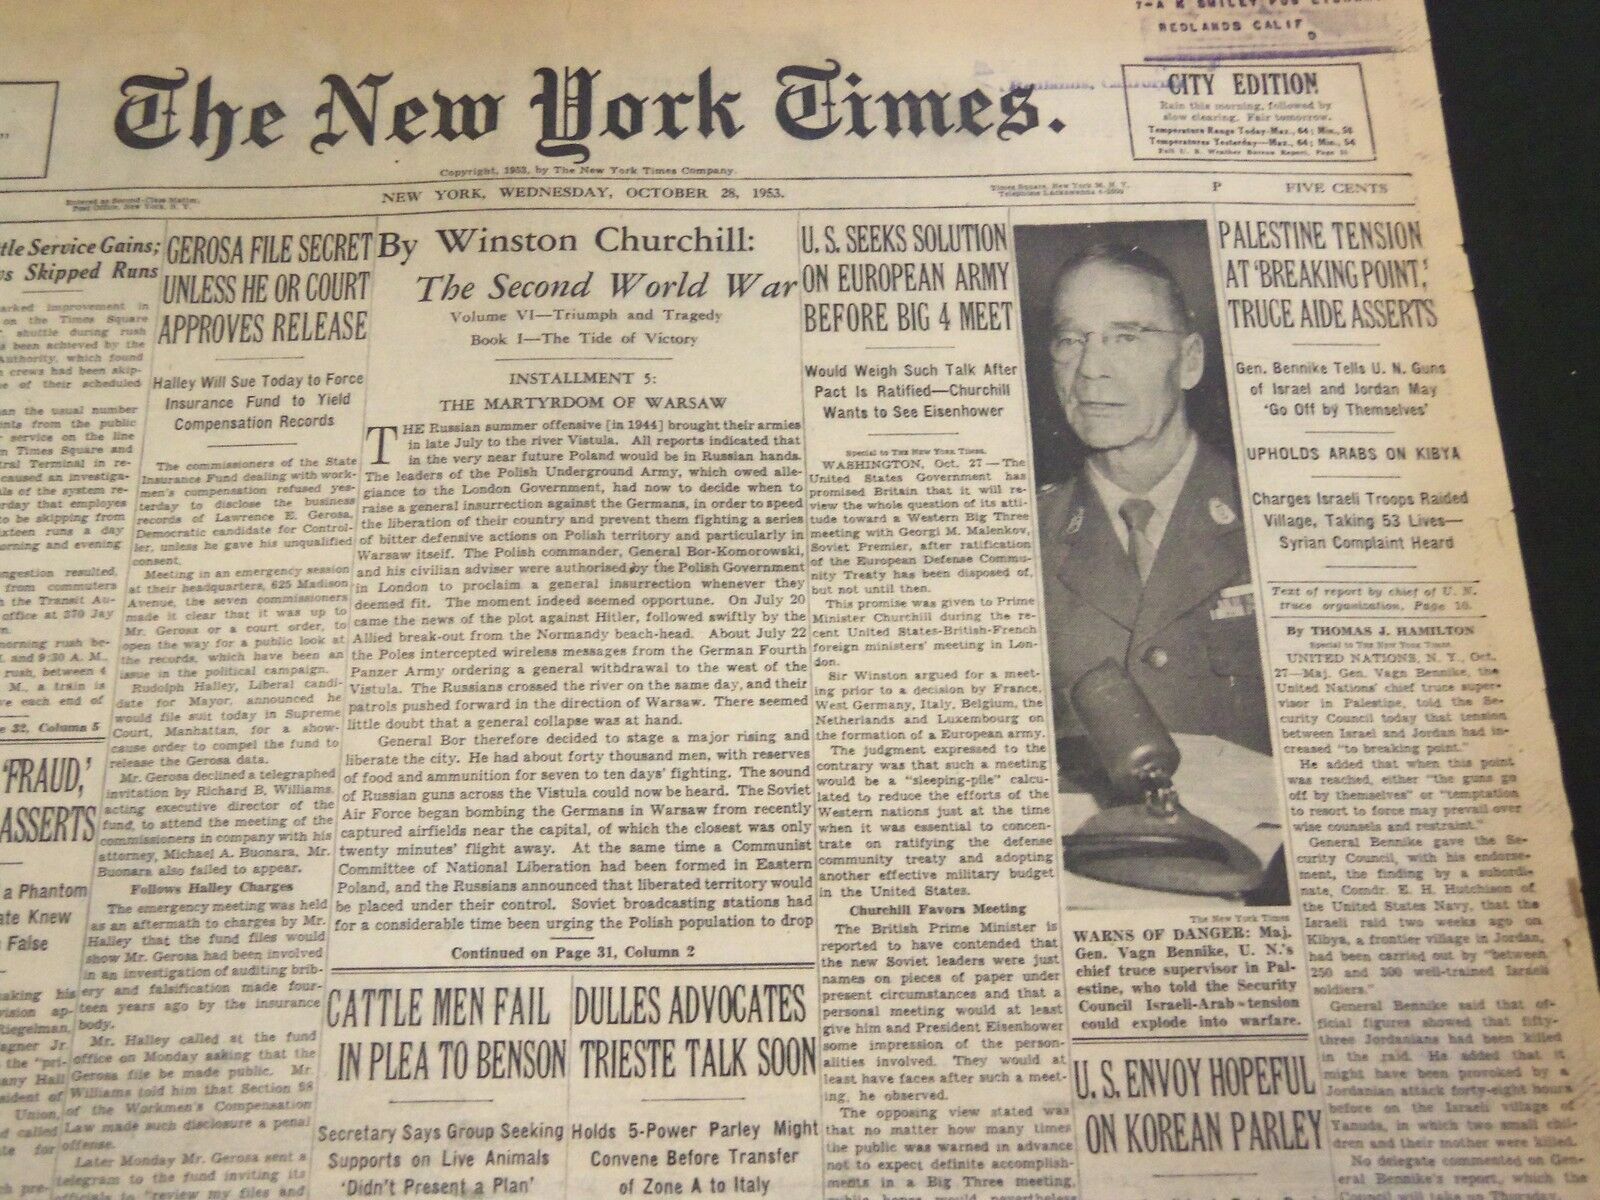 1953 OCTOBER 28 NEW YORK TIMES - PALESTINE TENSION AT BREAKING POINT - NT 4602